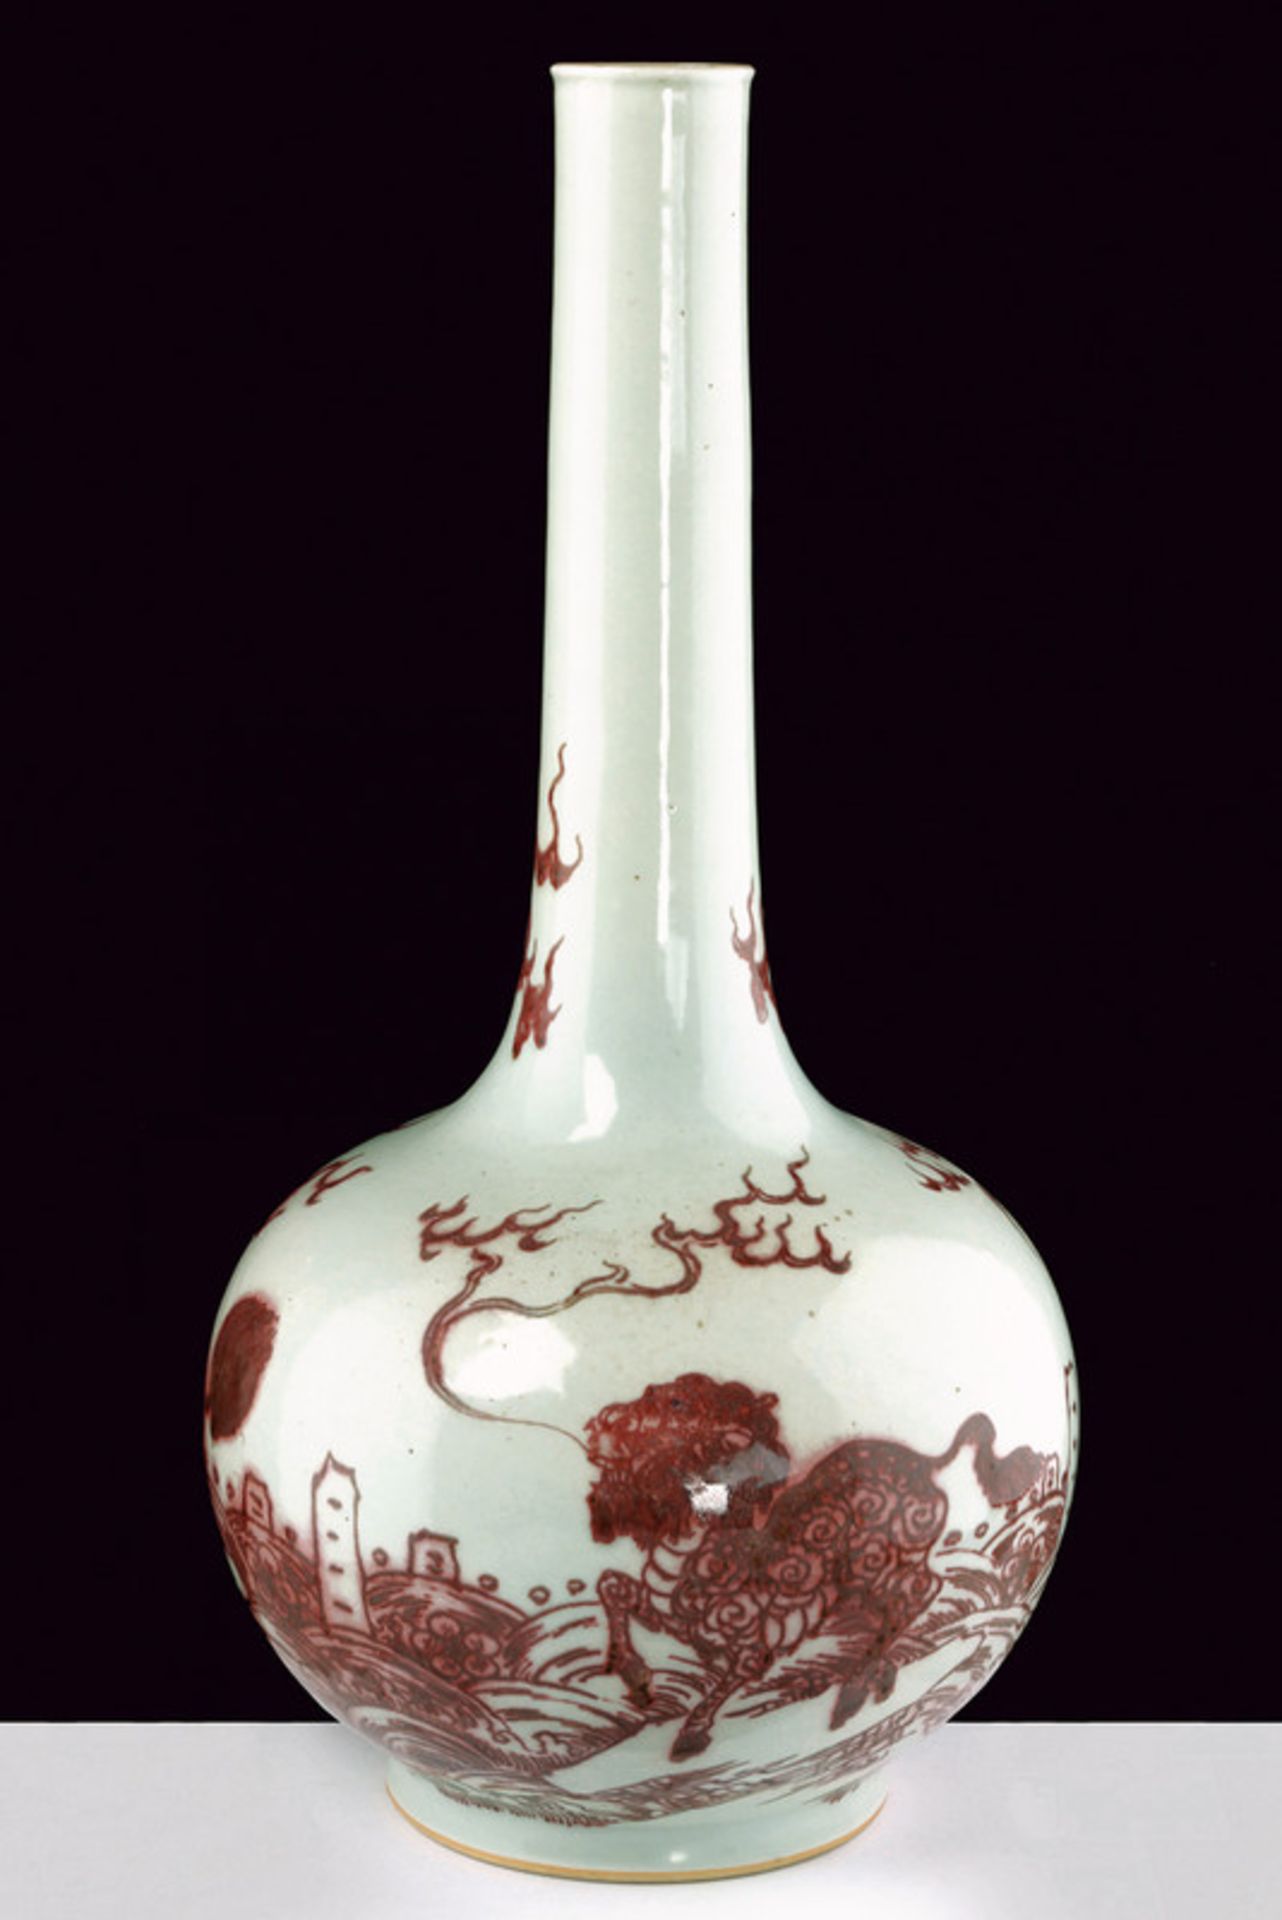 A fine and rare porcelain vase dating: 19th Century provenance: China Of very elegant shape, with